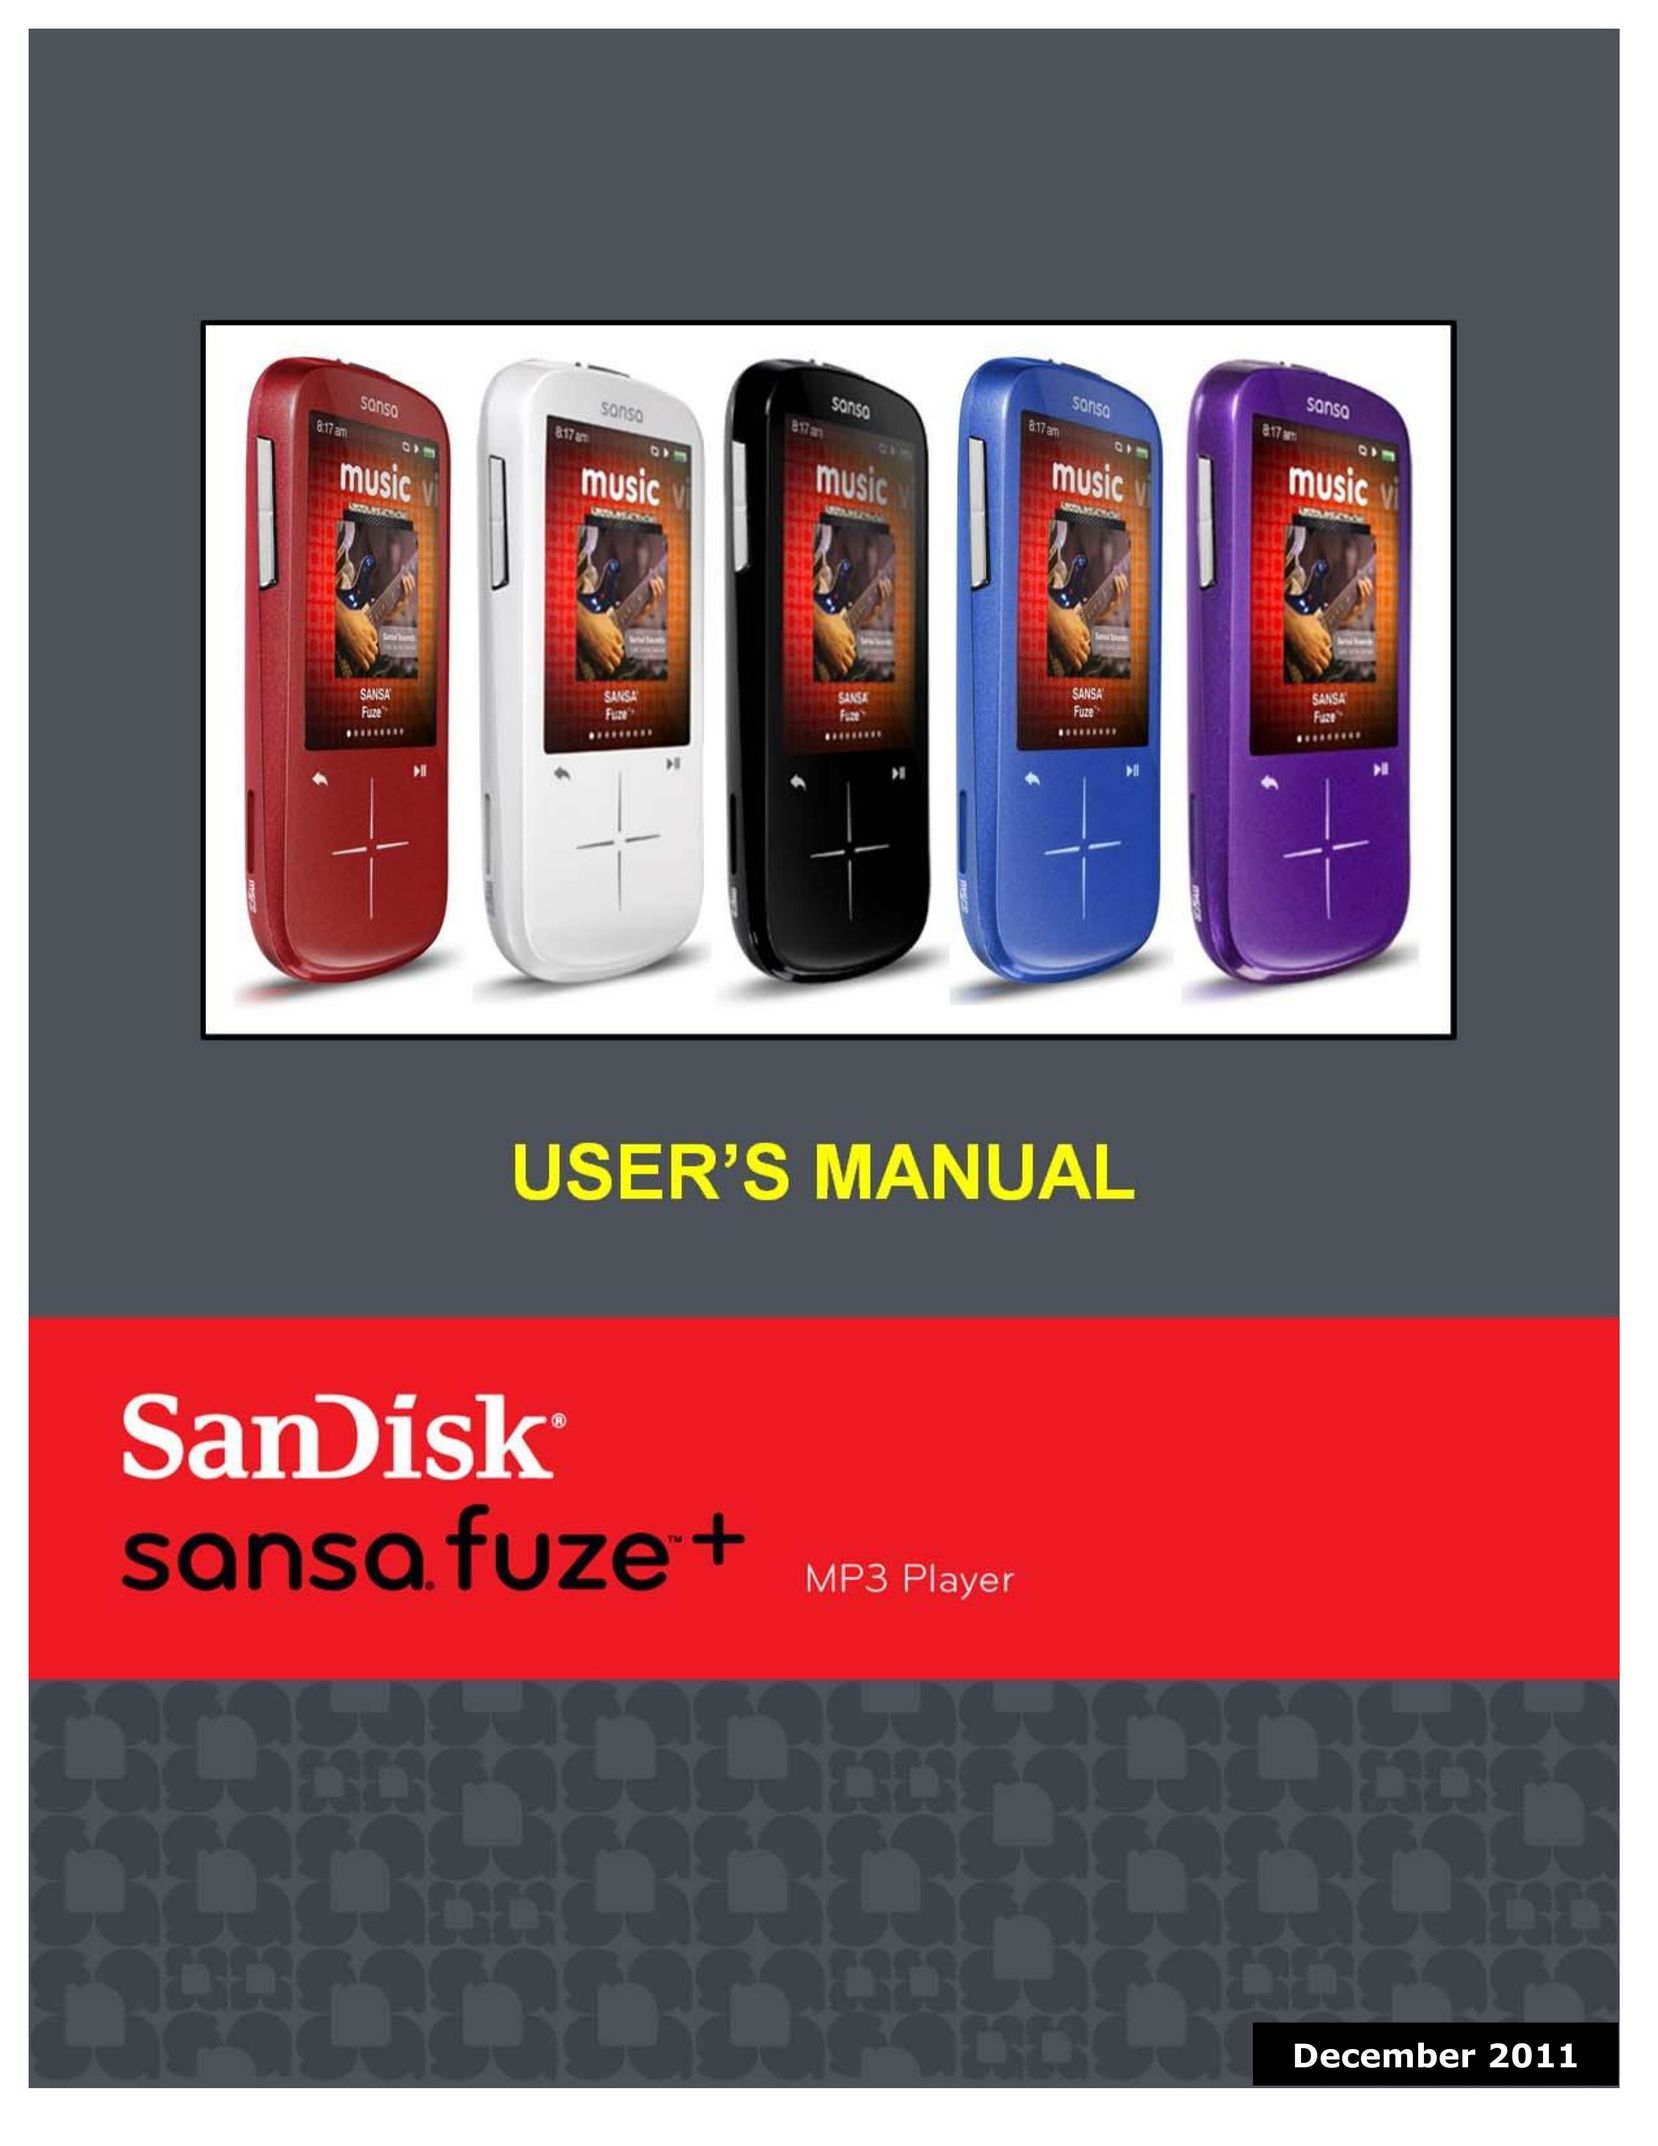 SanDisk MP3 Player MP3 Player User Manual